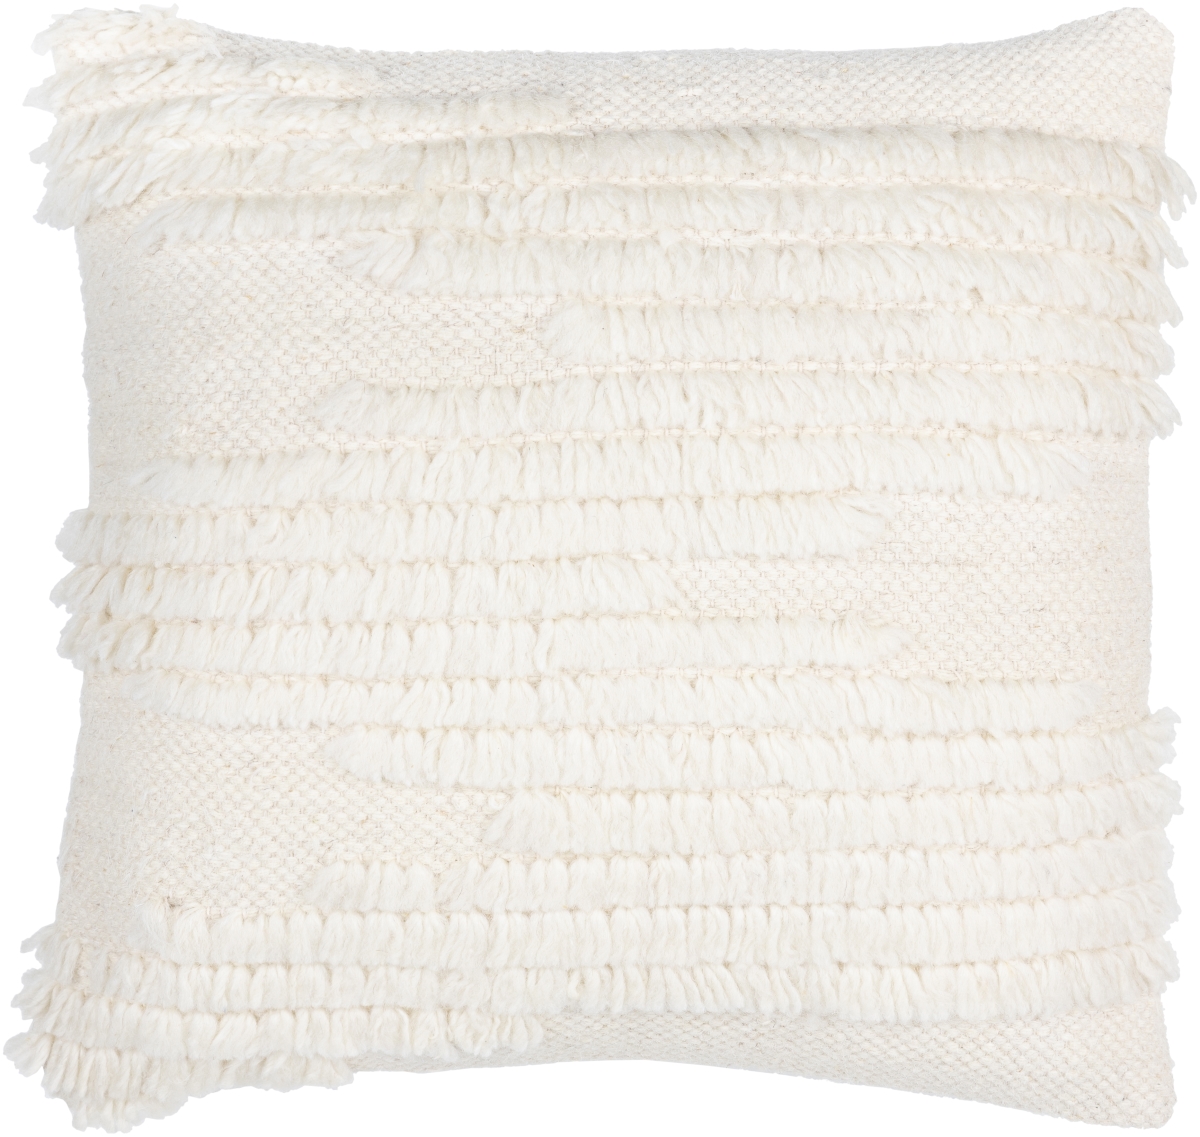 Picture of Livabliss APA001-1818P 18 x 18 in. Apache APA-001 Pillow Cover with Polyester Insert, Cream